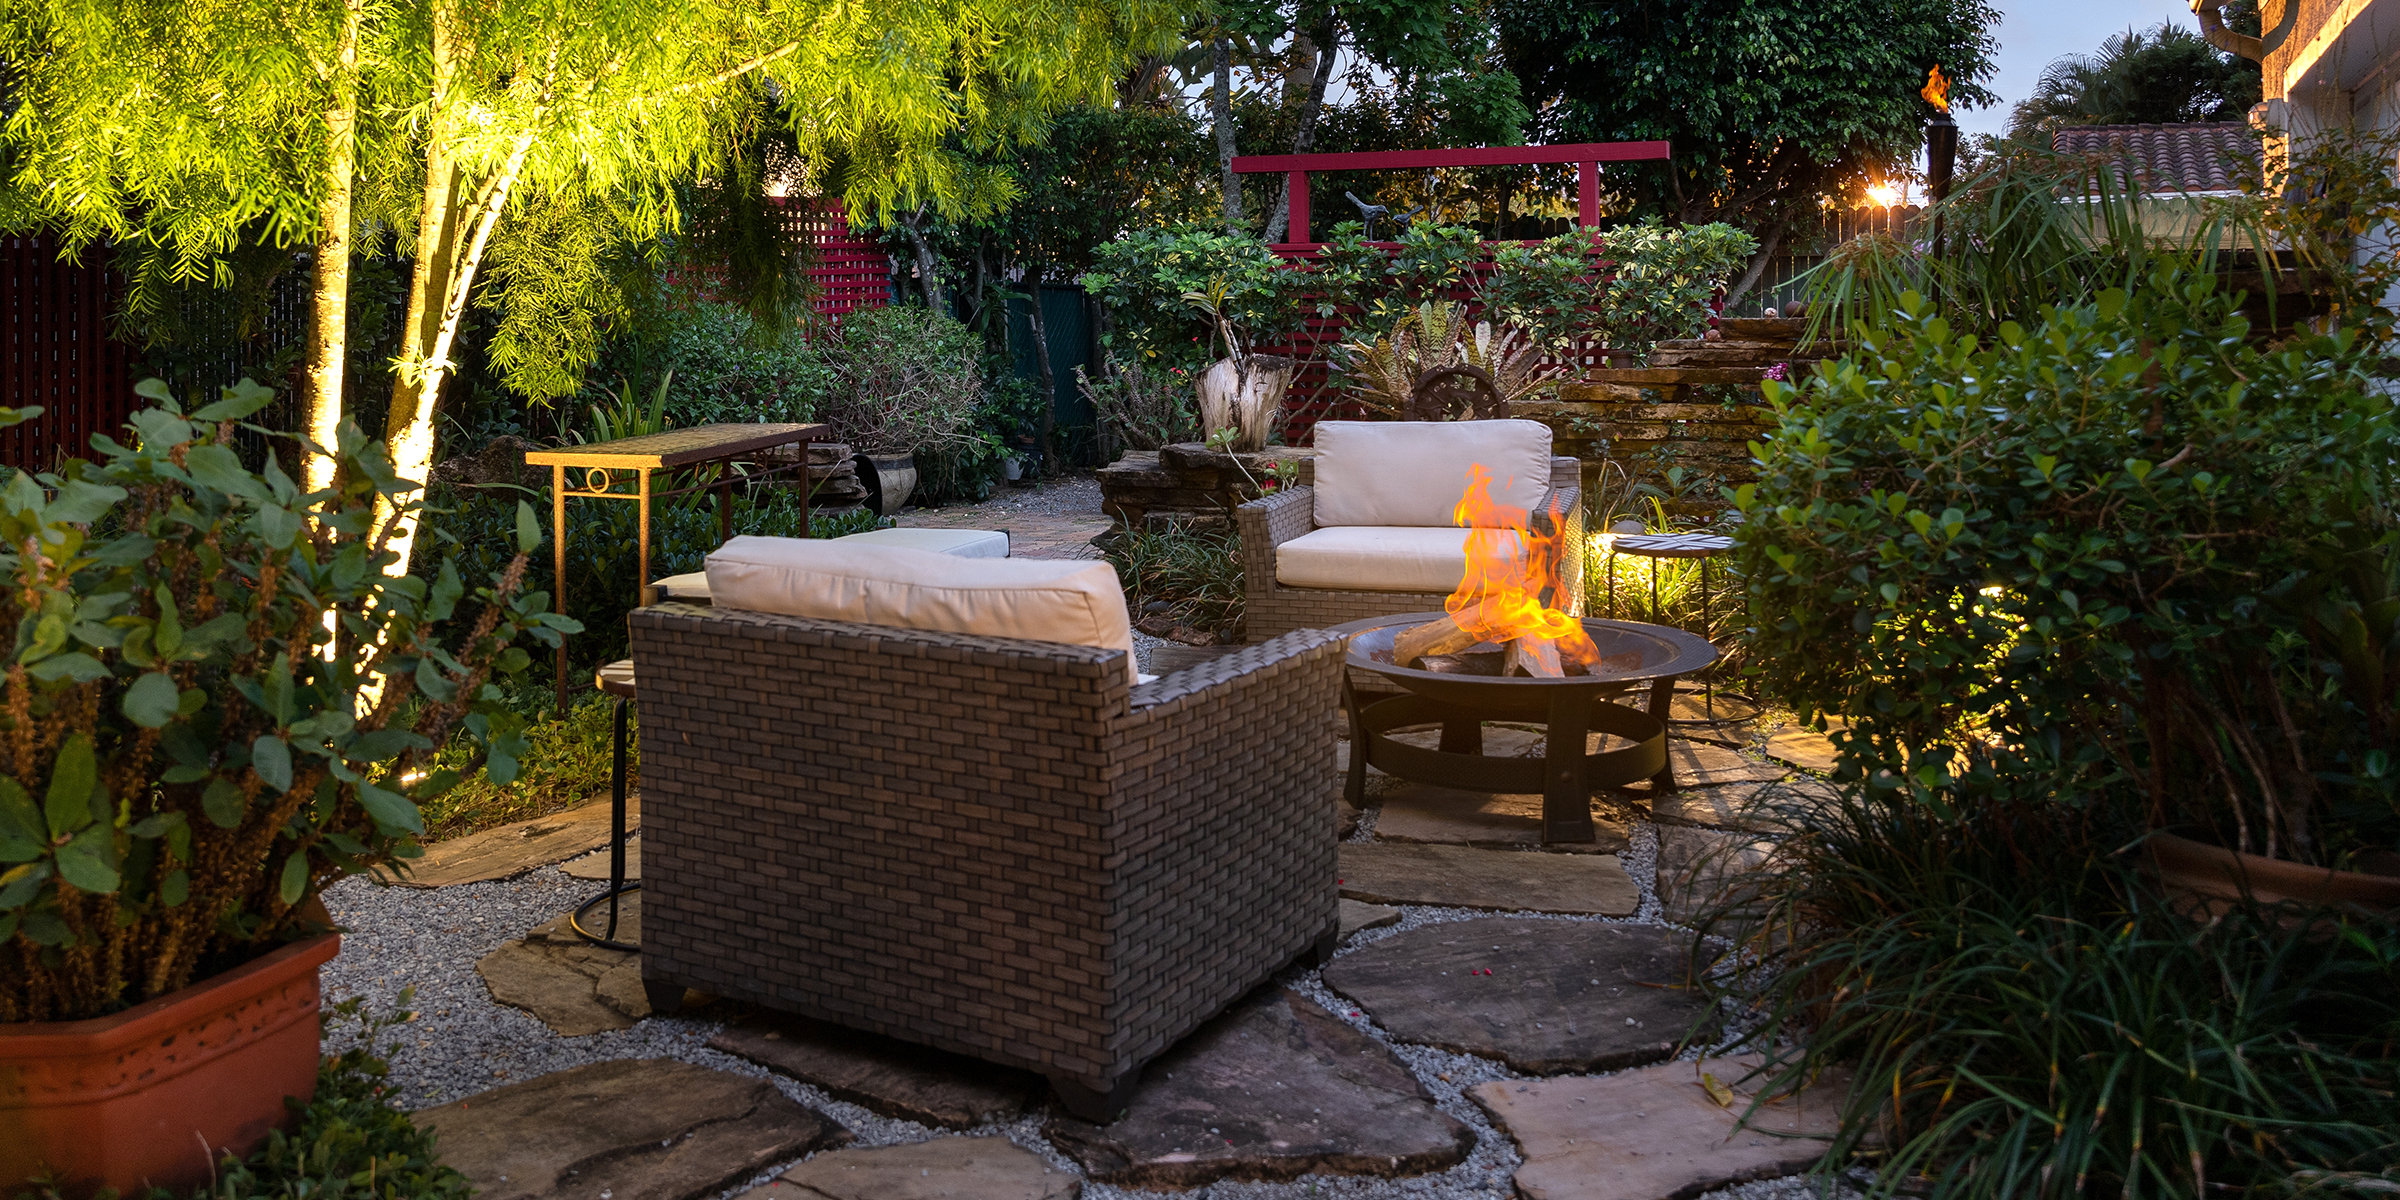 A thoughtfully designed patio | Source: Shutterstock